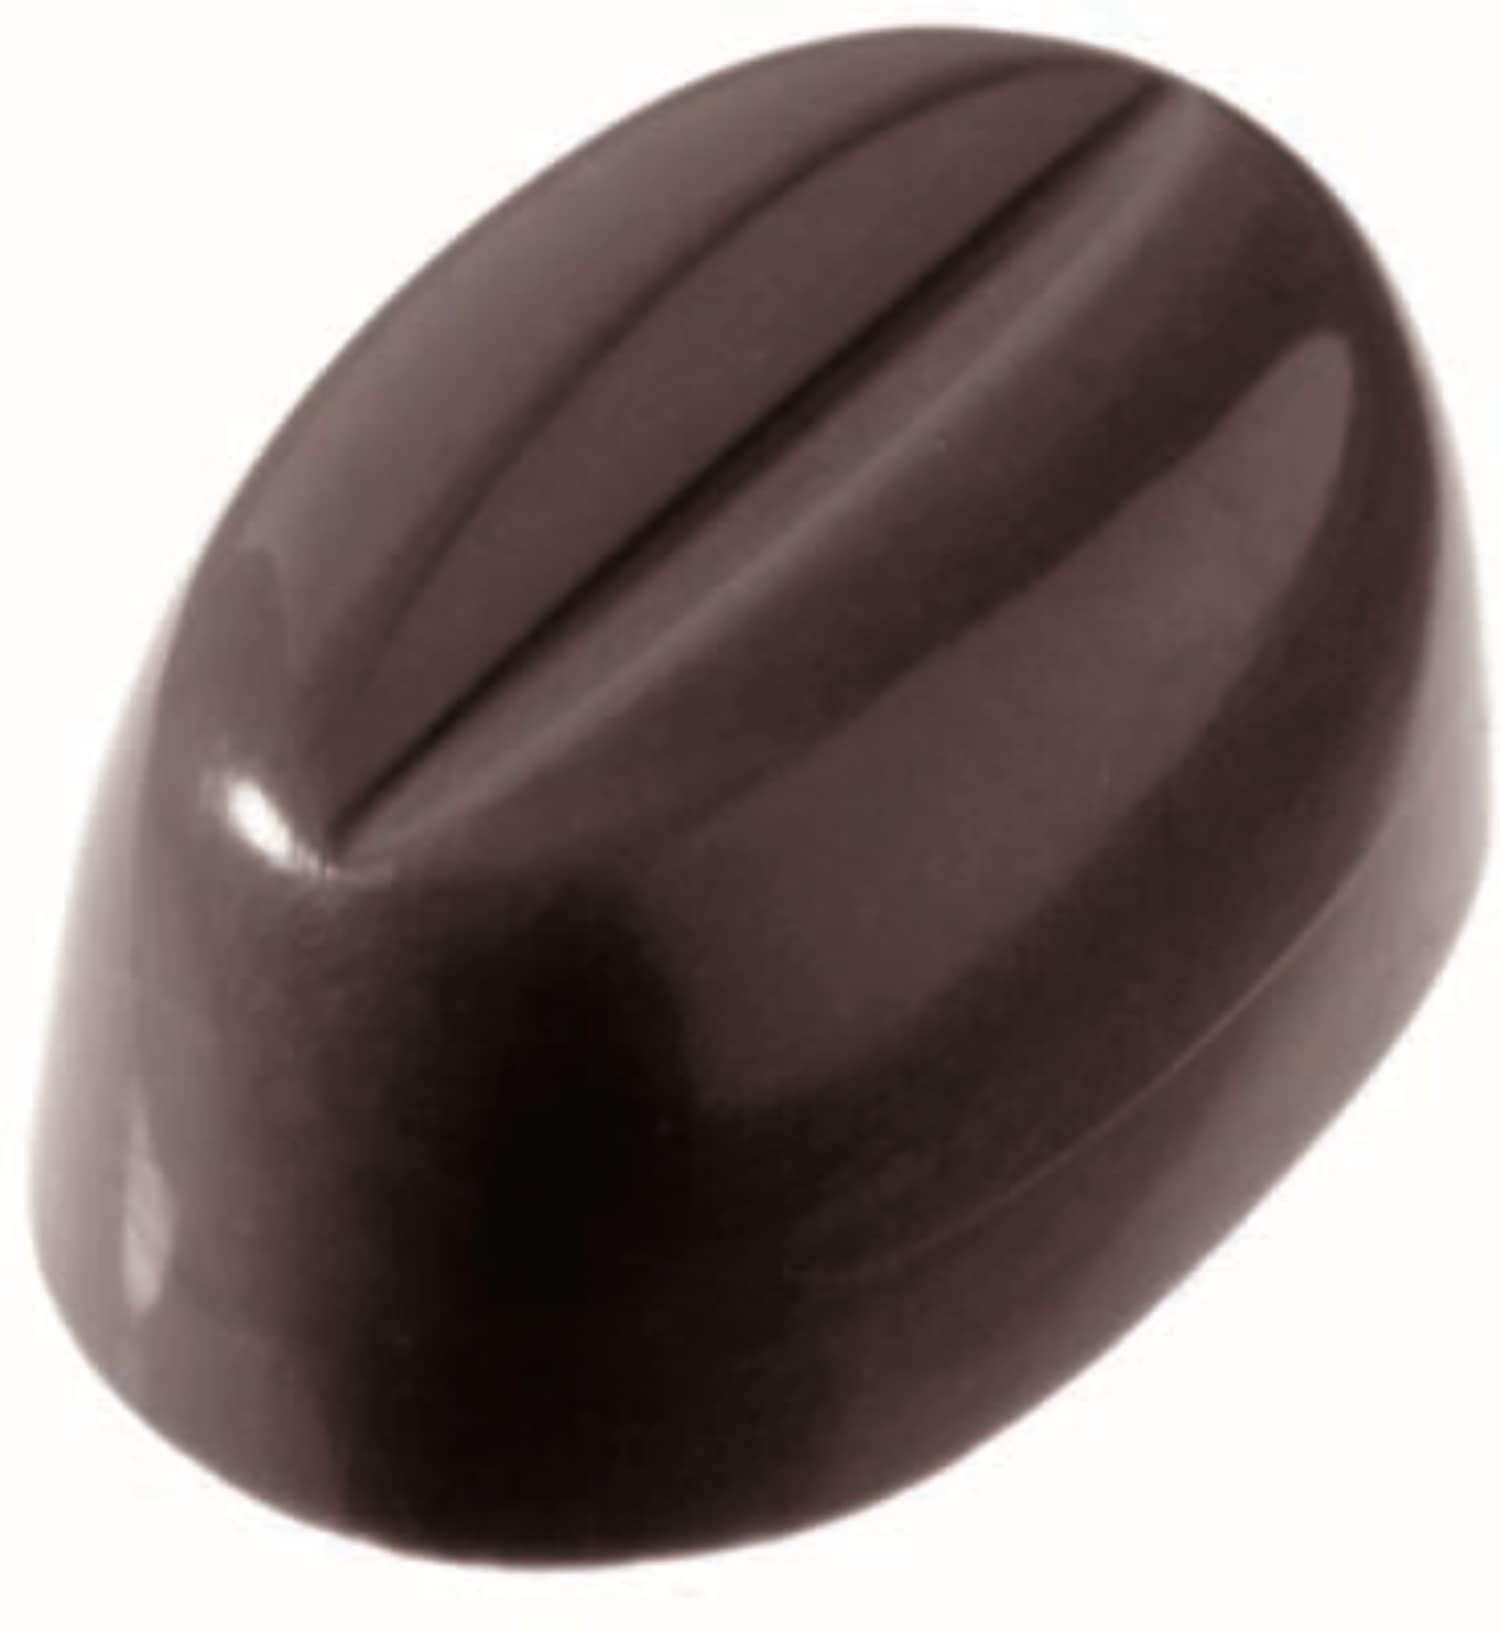 Chocolate mould "Coffee bean" 421327 421327